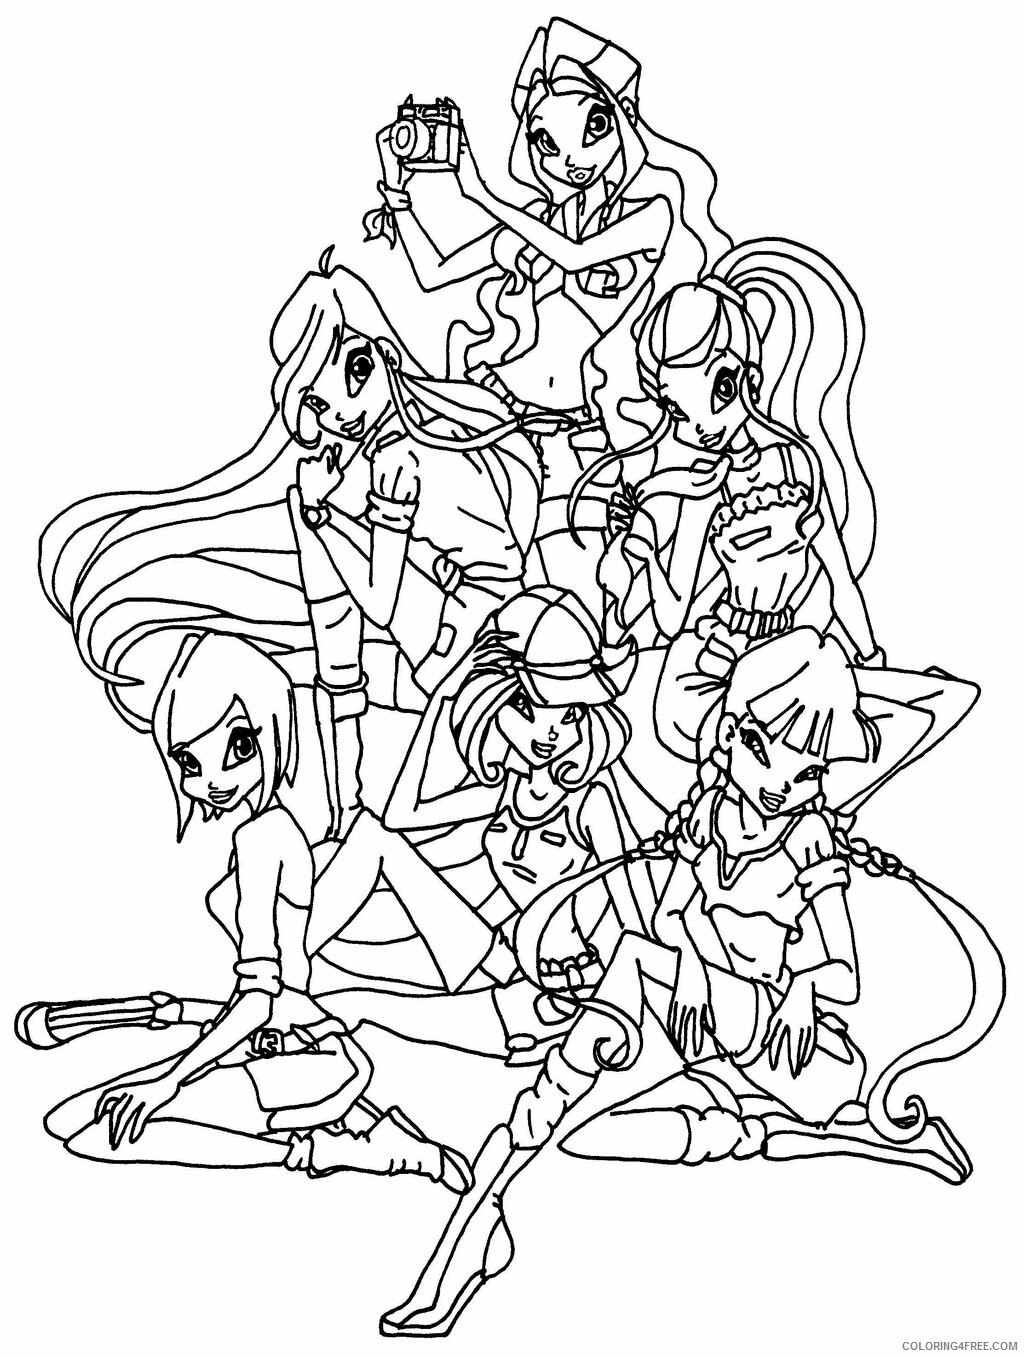 Winx Club Coloring Pages TV Film Winx Club Printable 2020 11523 Coloring4free